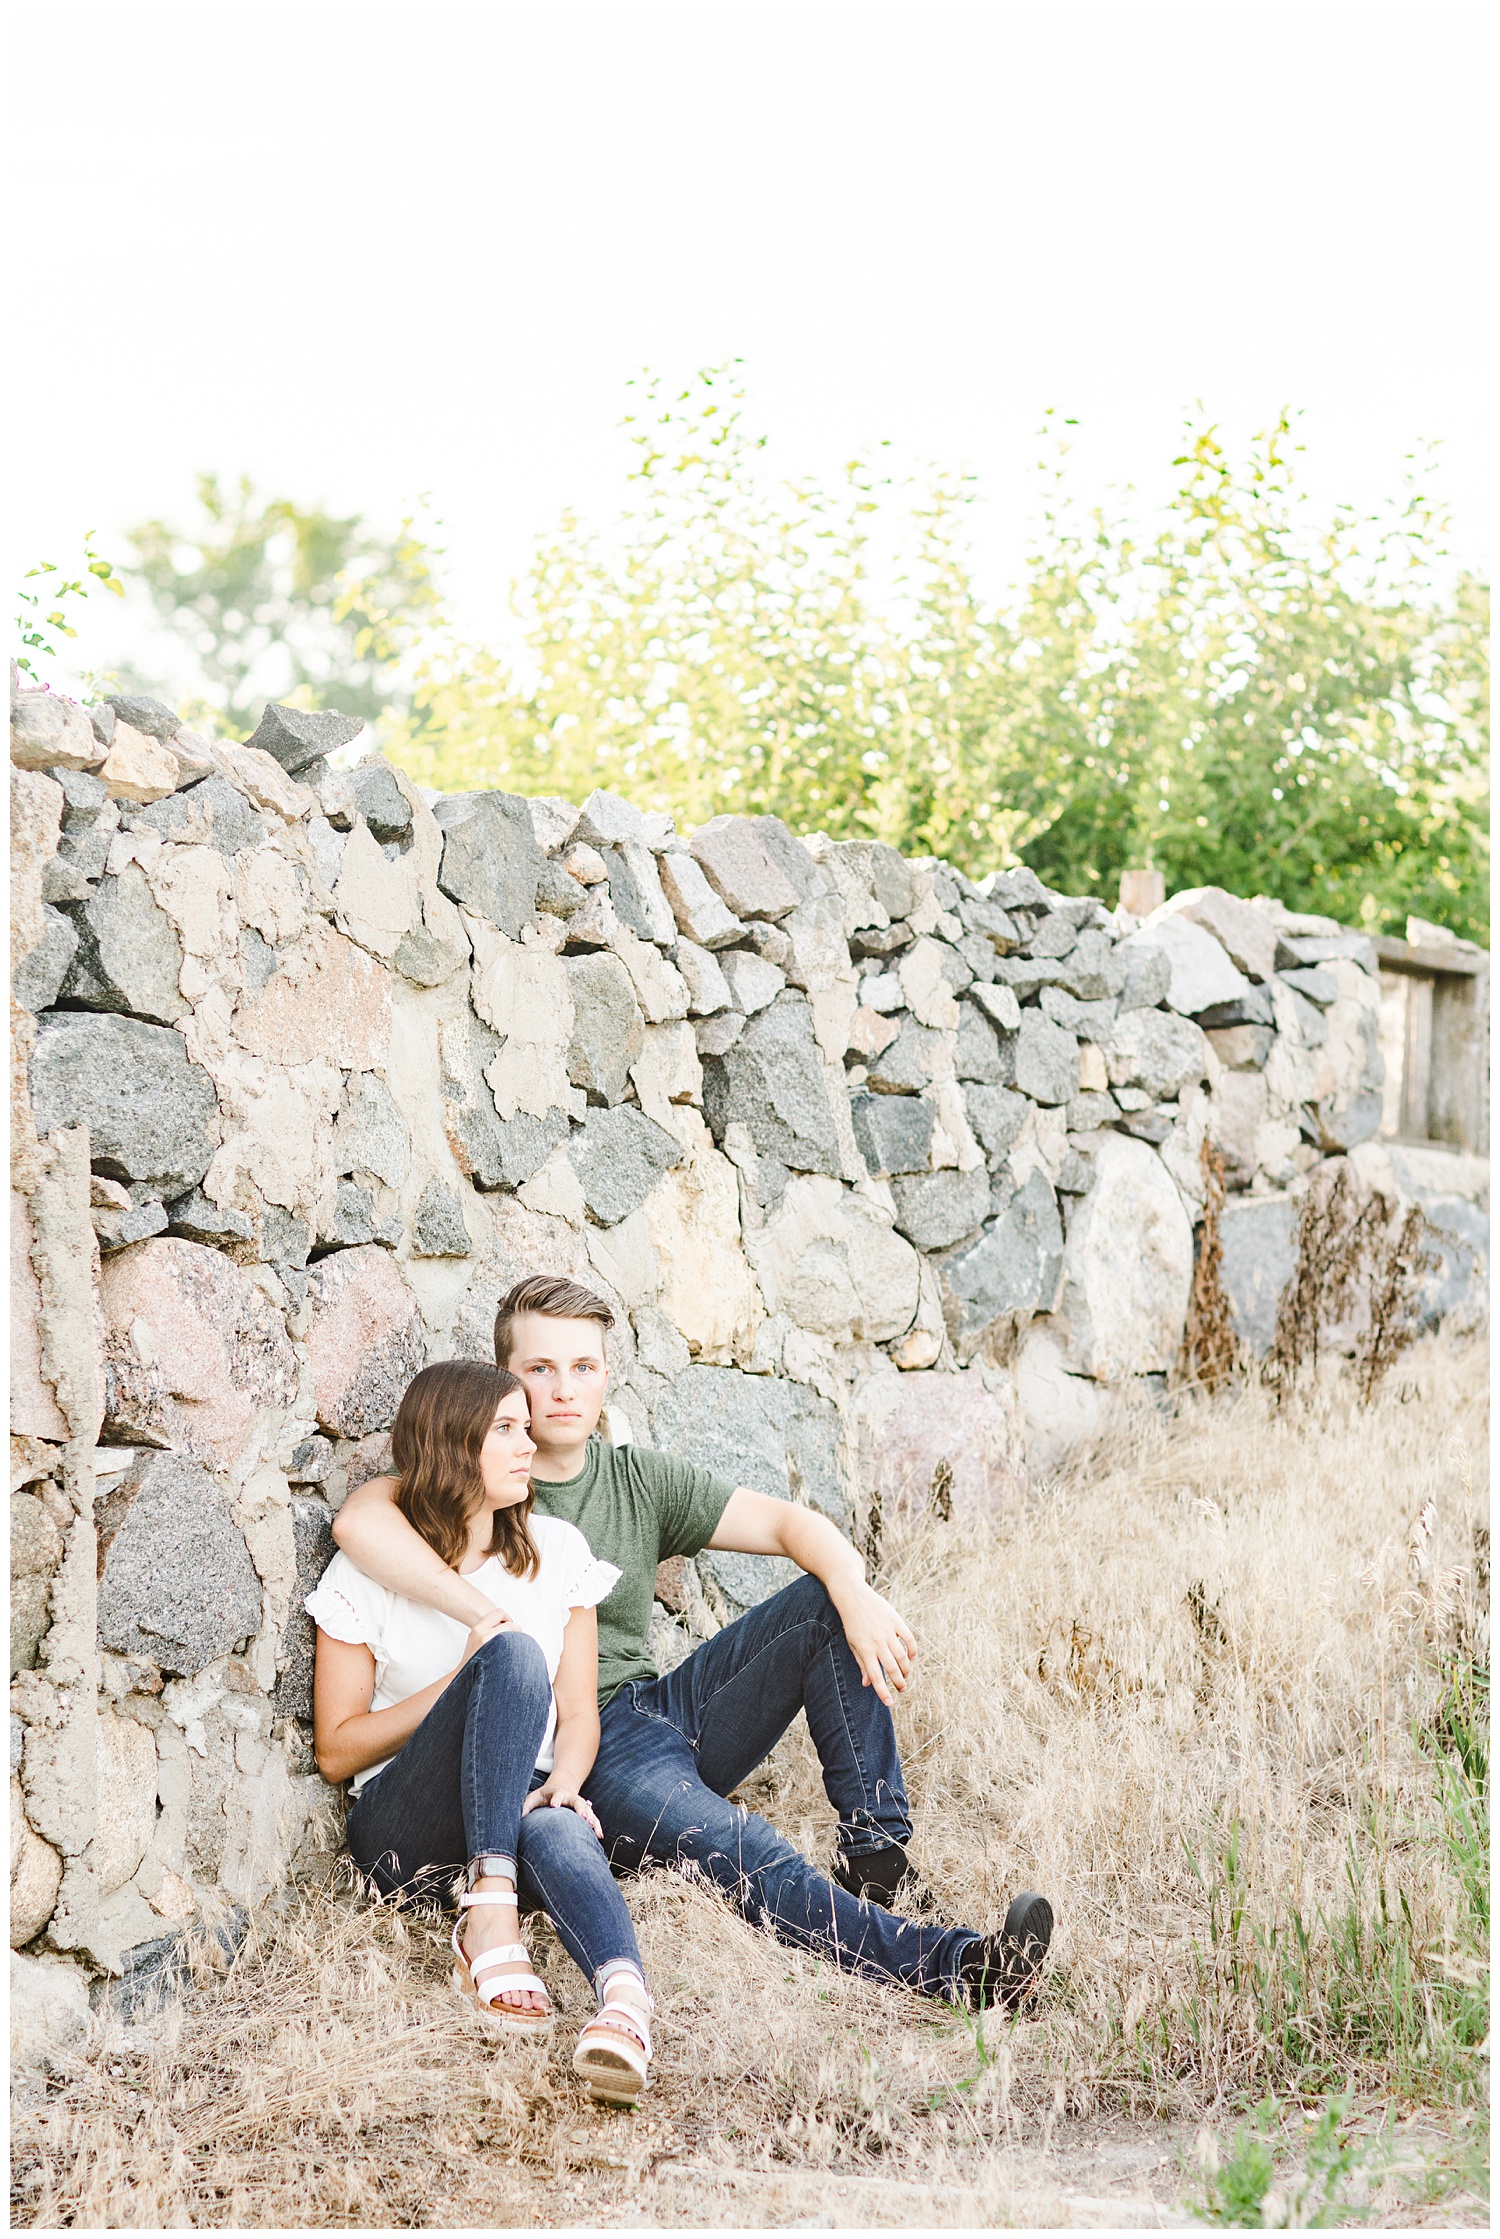 Luke wraps his arm around Jadi as they sit against an old stone wall | CB Studio